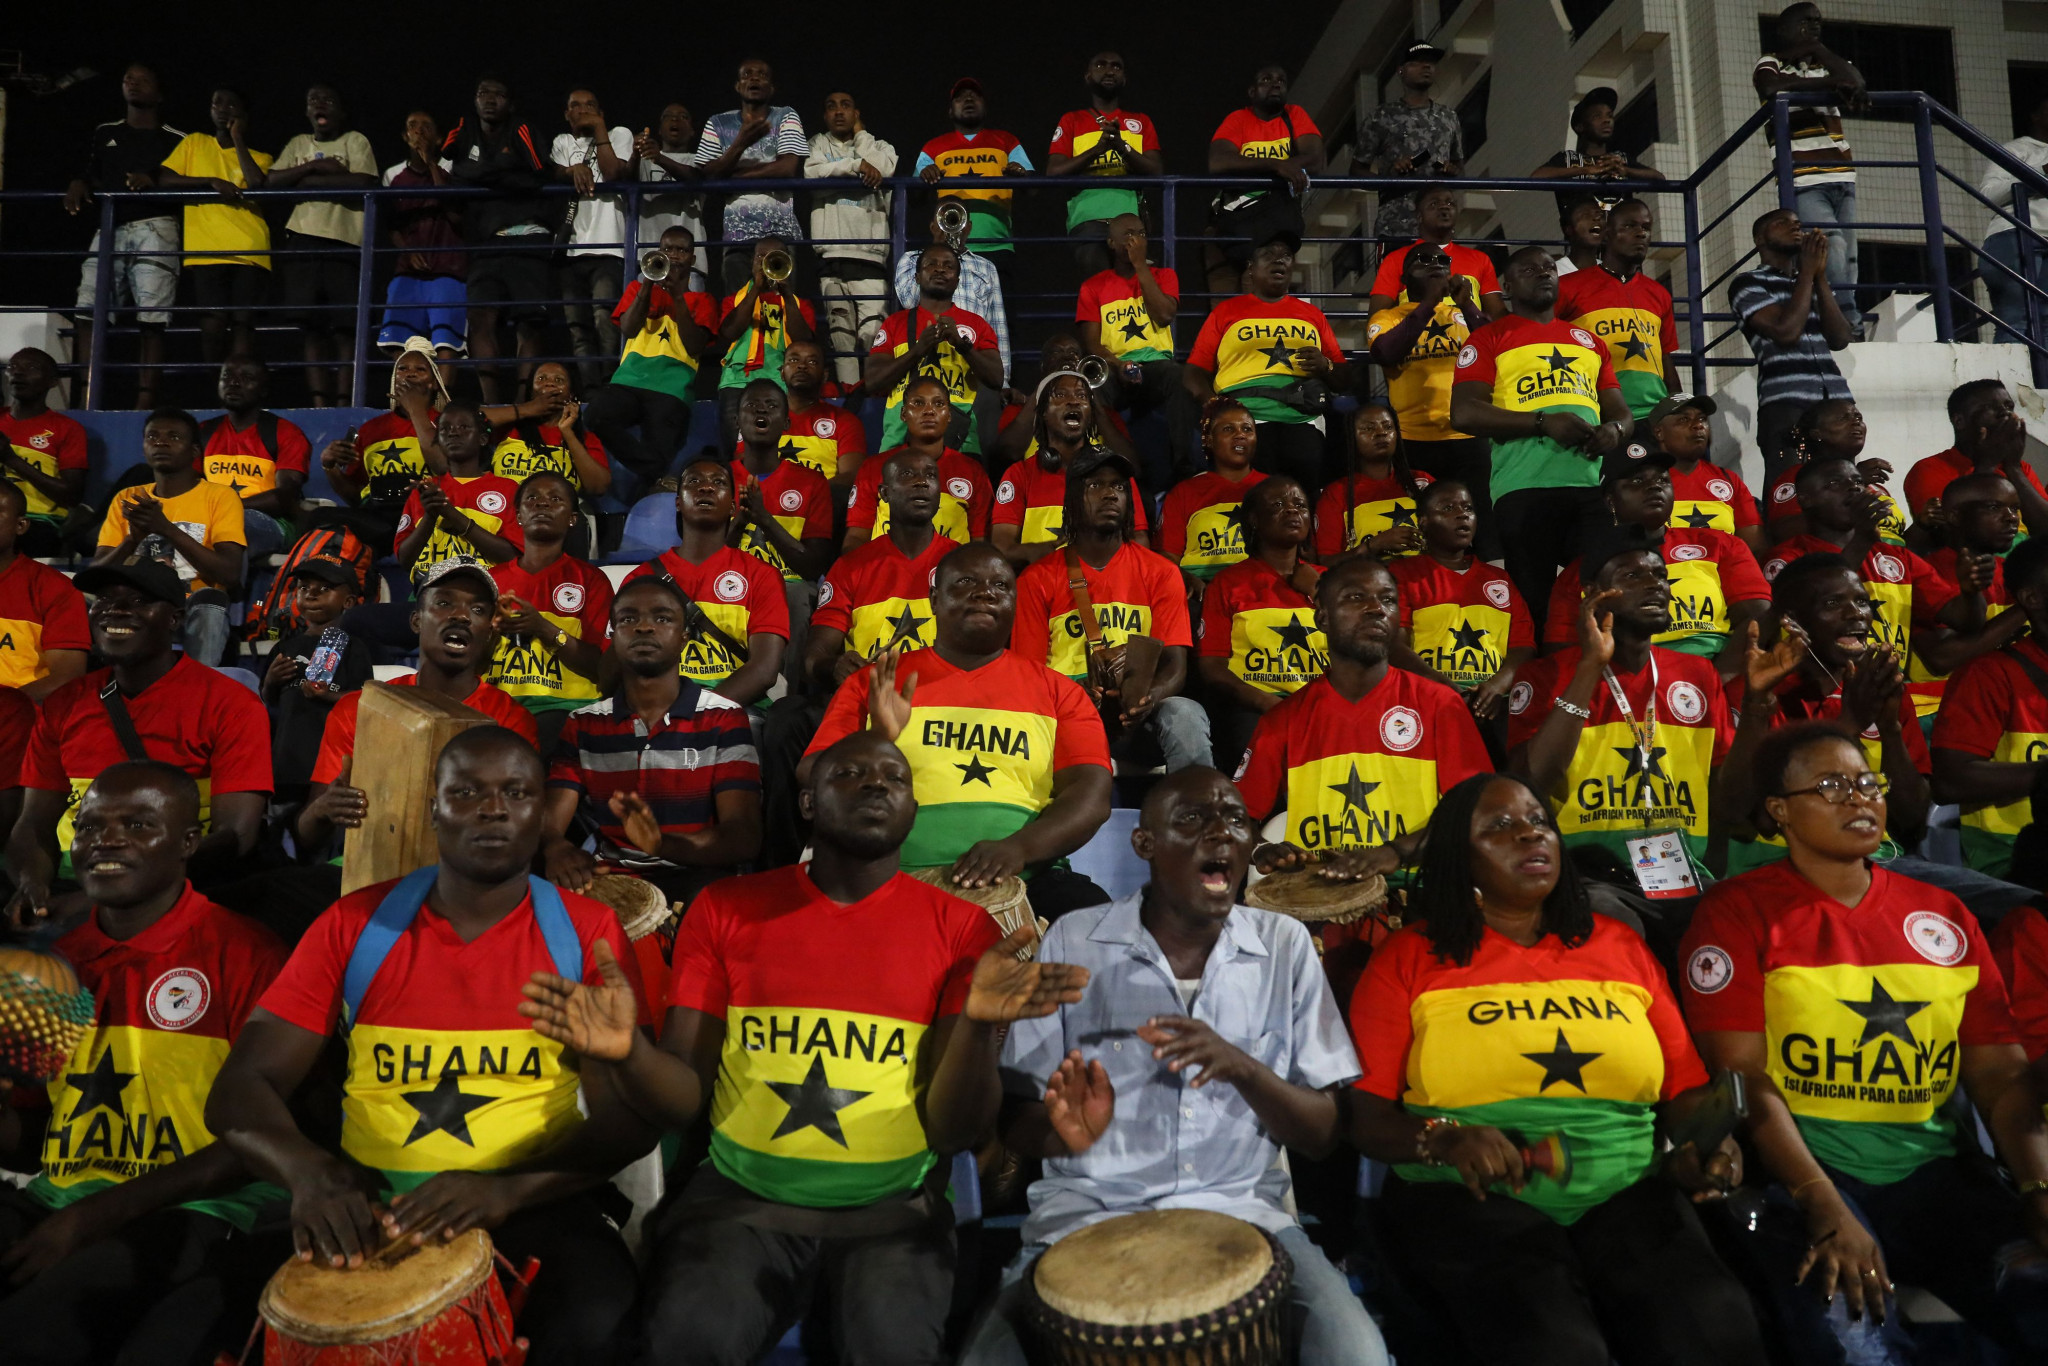 More than 40 countries confirm attendance at African Games in Ghana